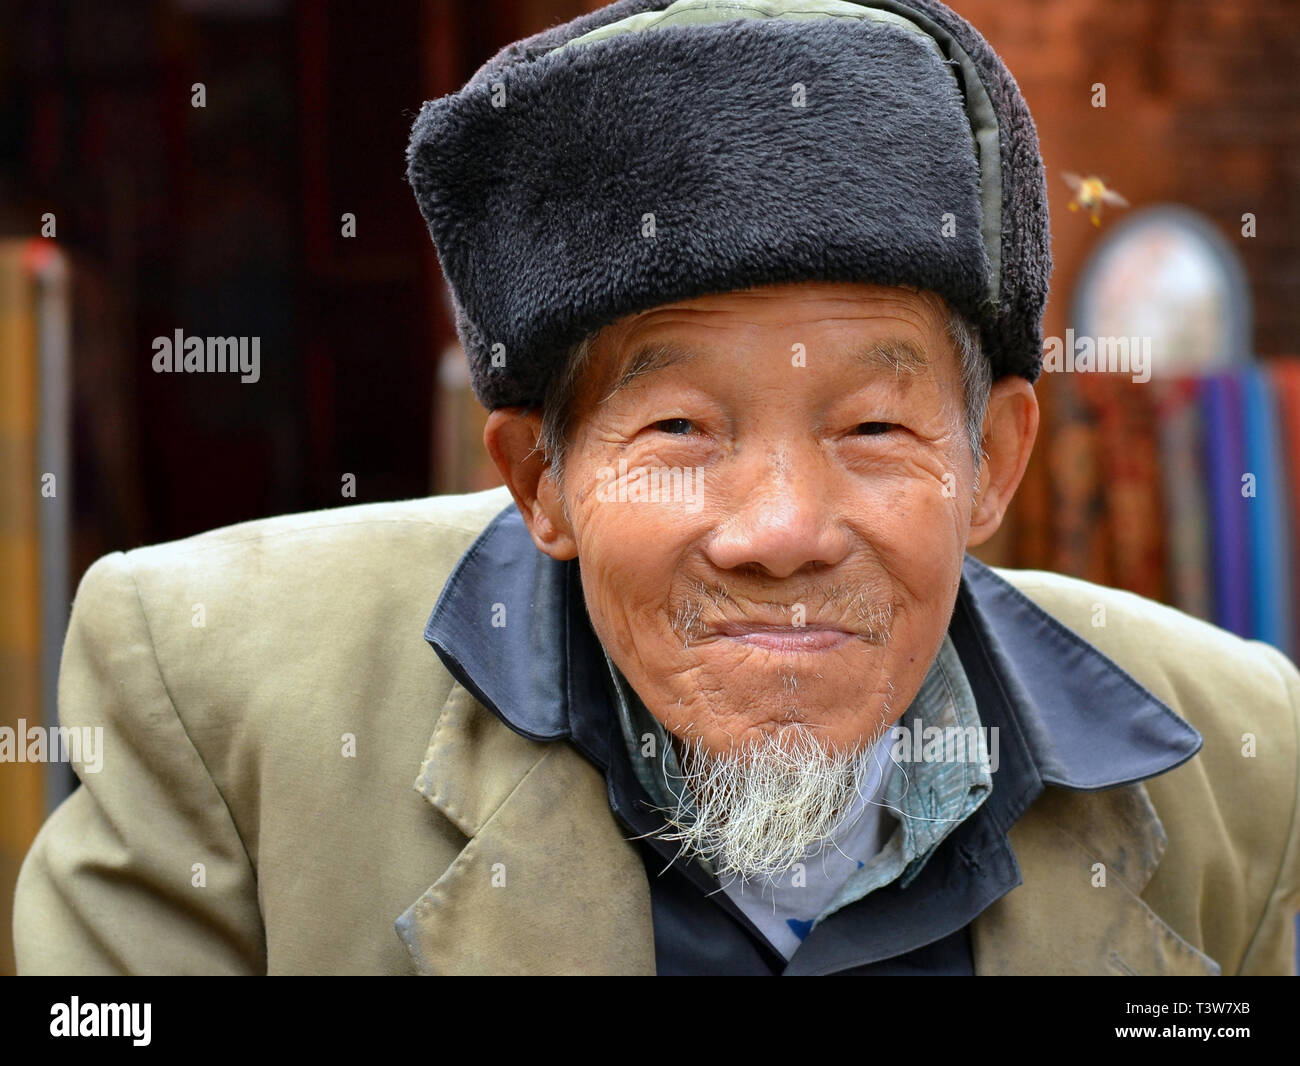 Old Chinese river fisherman wears a military-style ushanka hat and smiles for the camera. Stock Photo